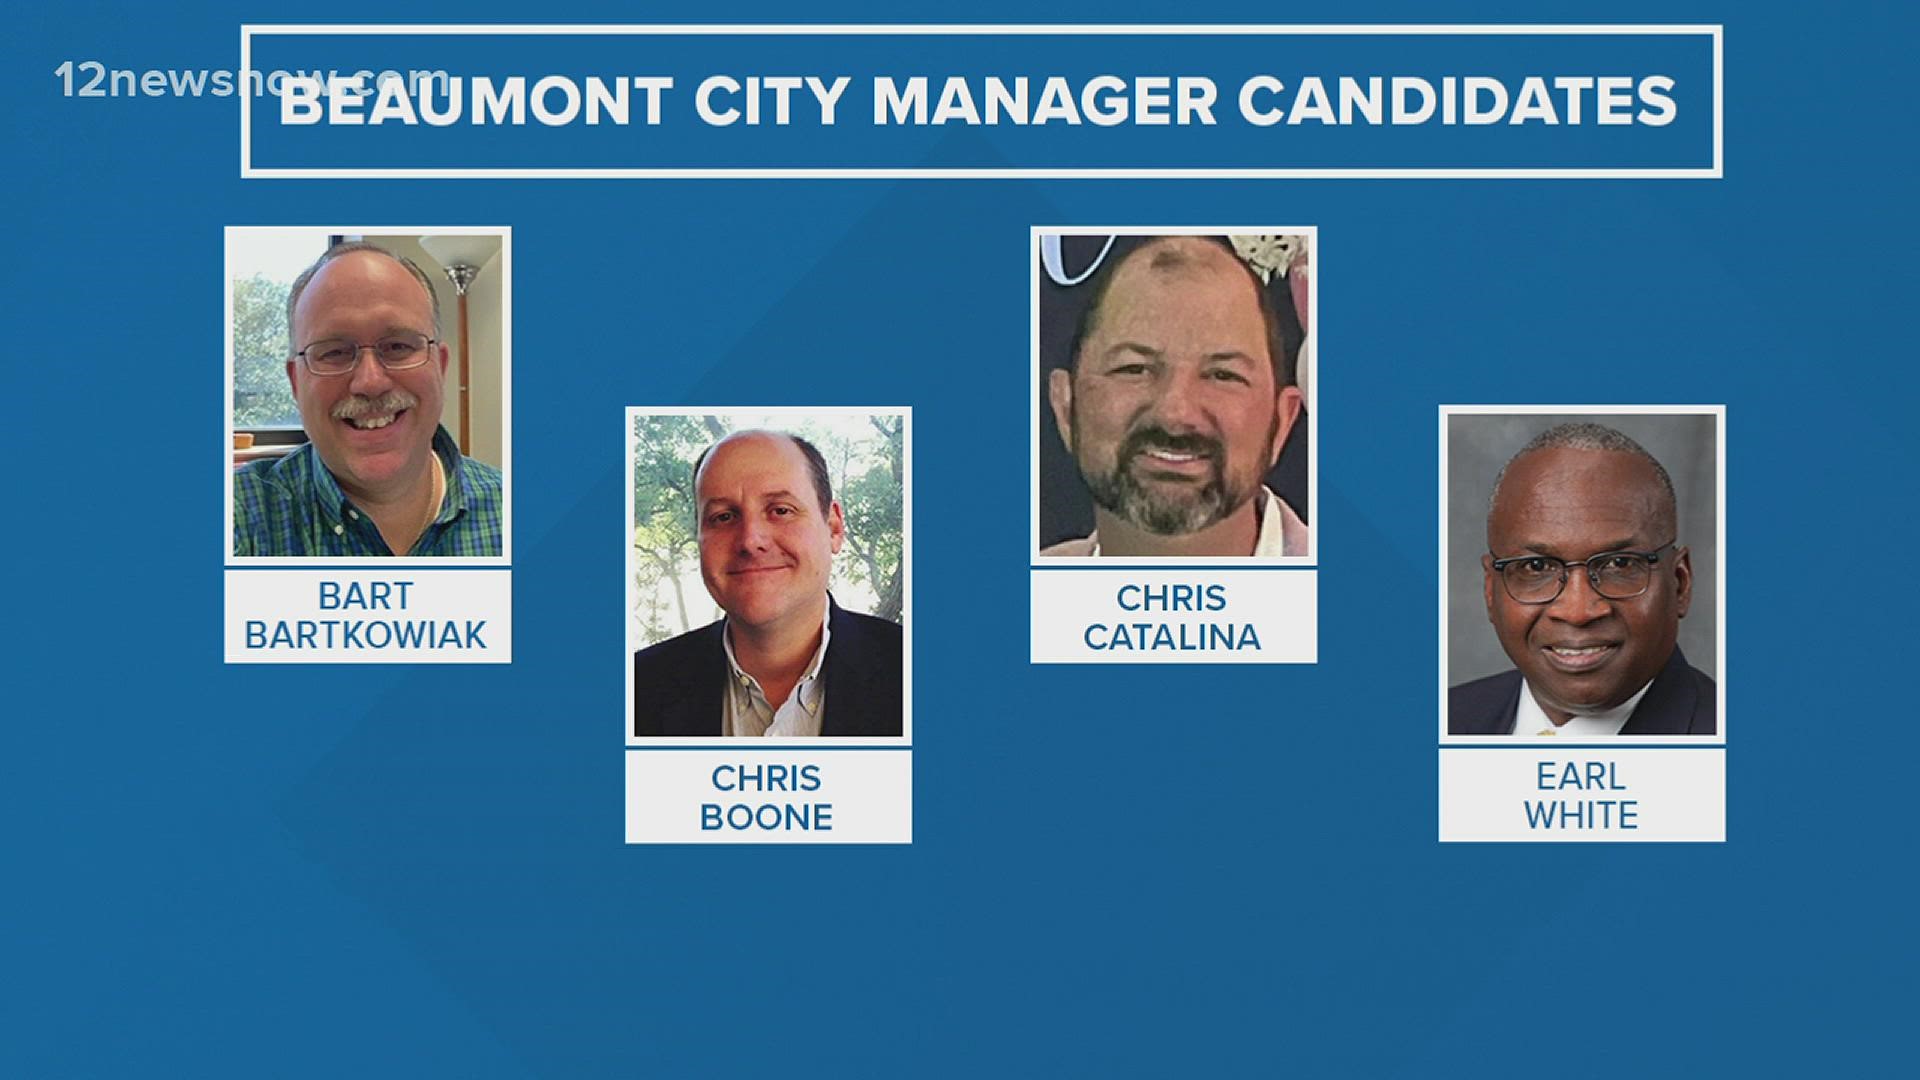 All four candidates are existing city officials.